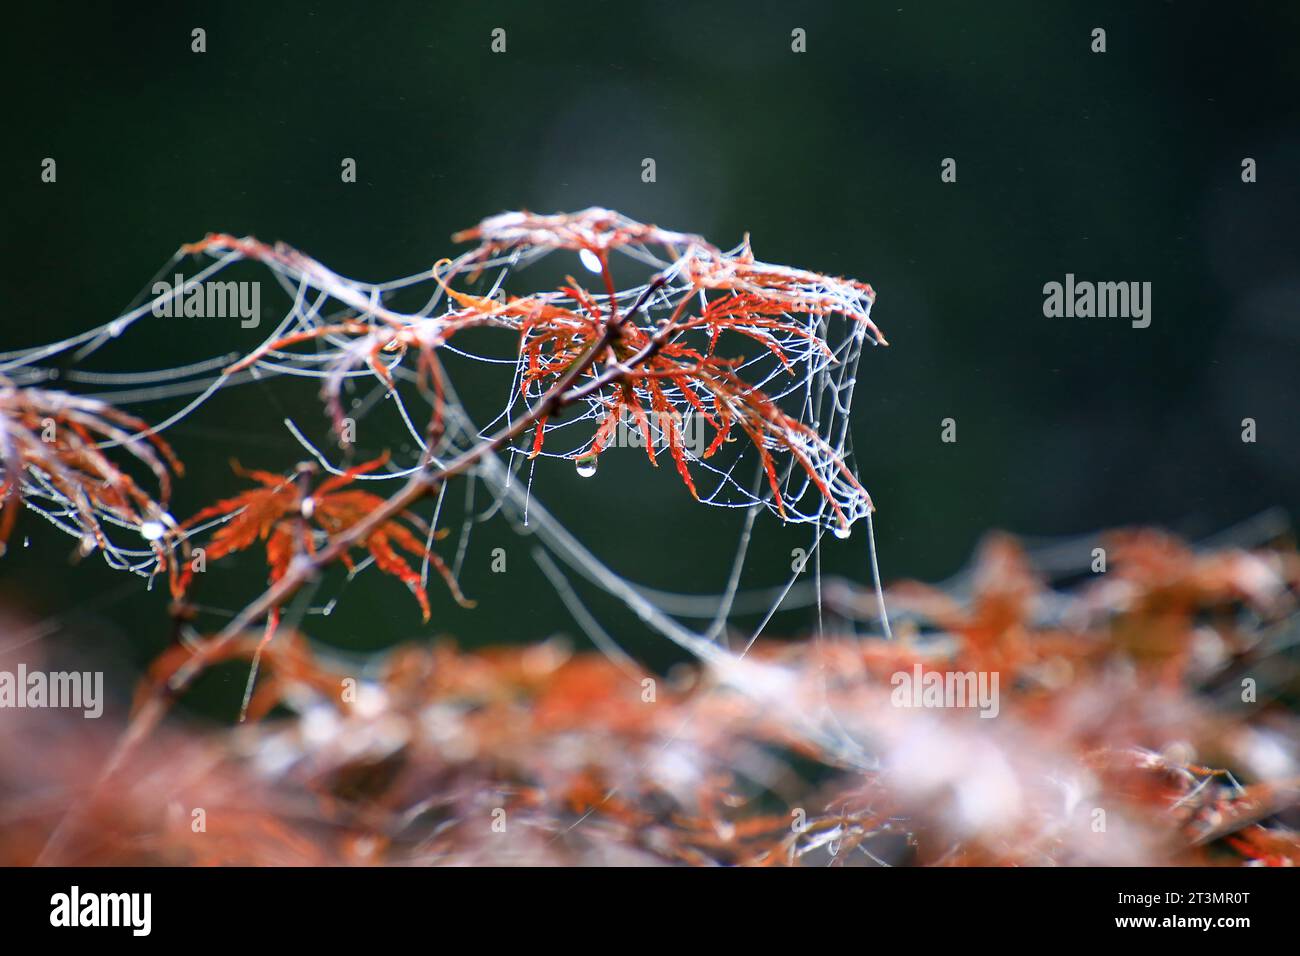 Morning dew on maple leaves and silk strands during autumn. Stock Photo